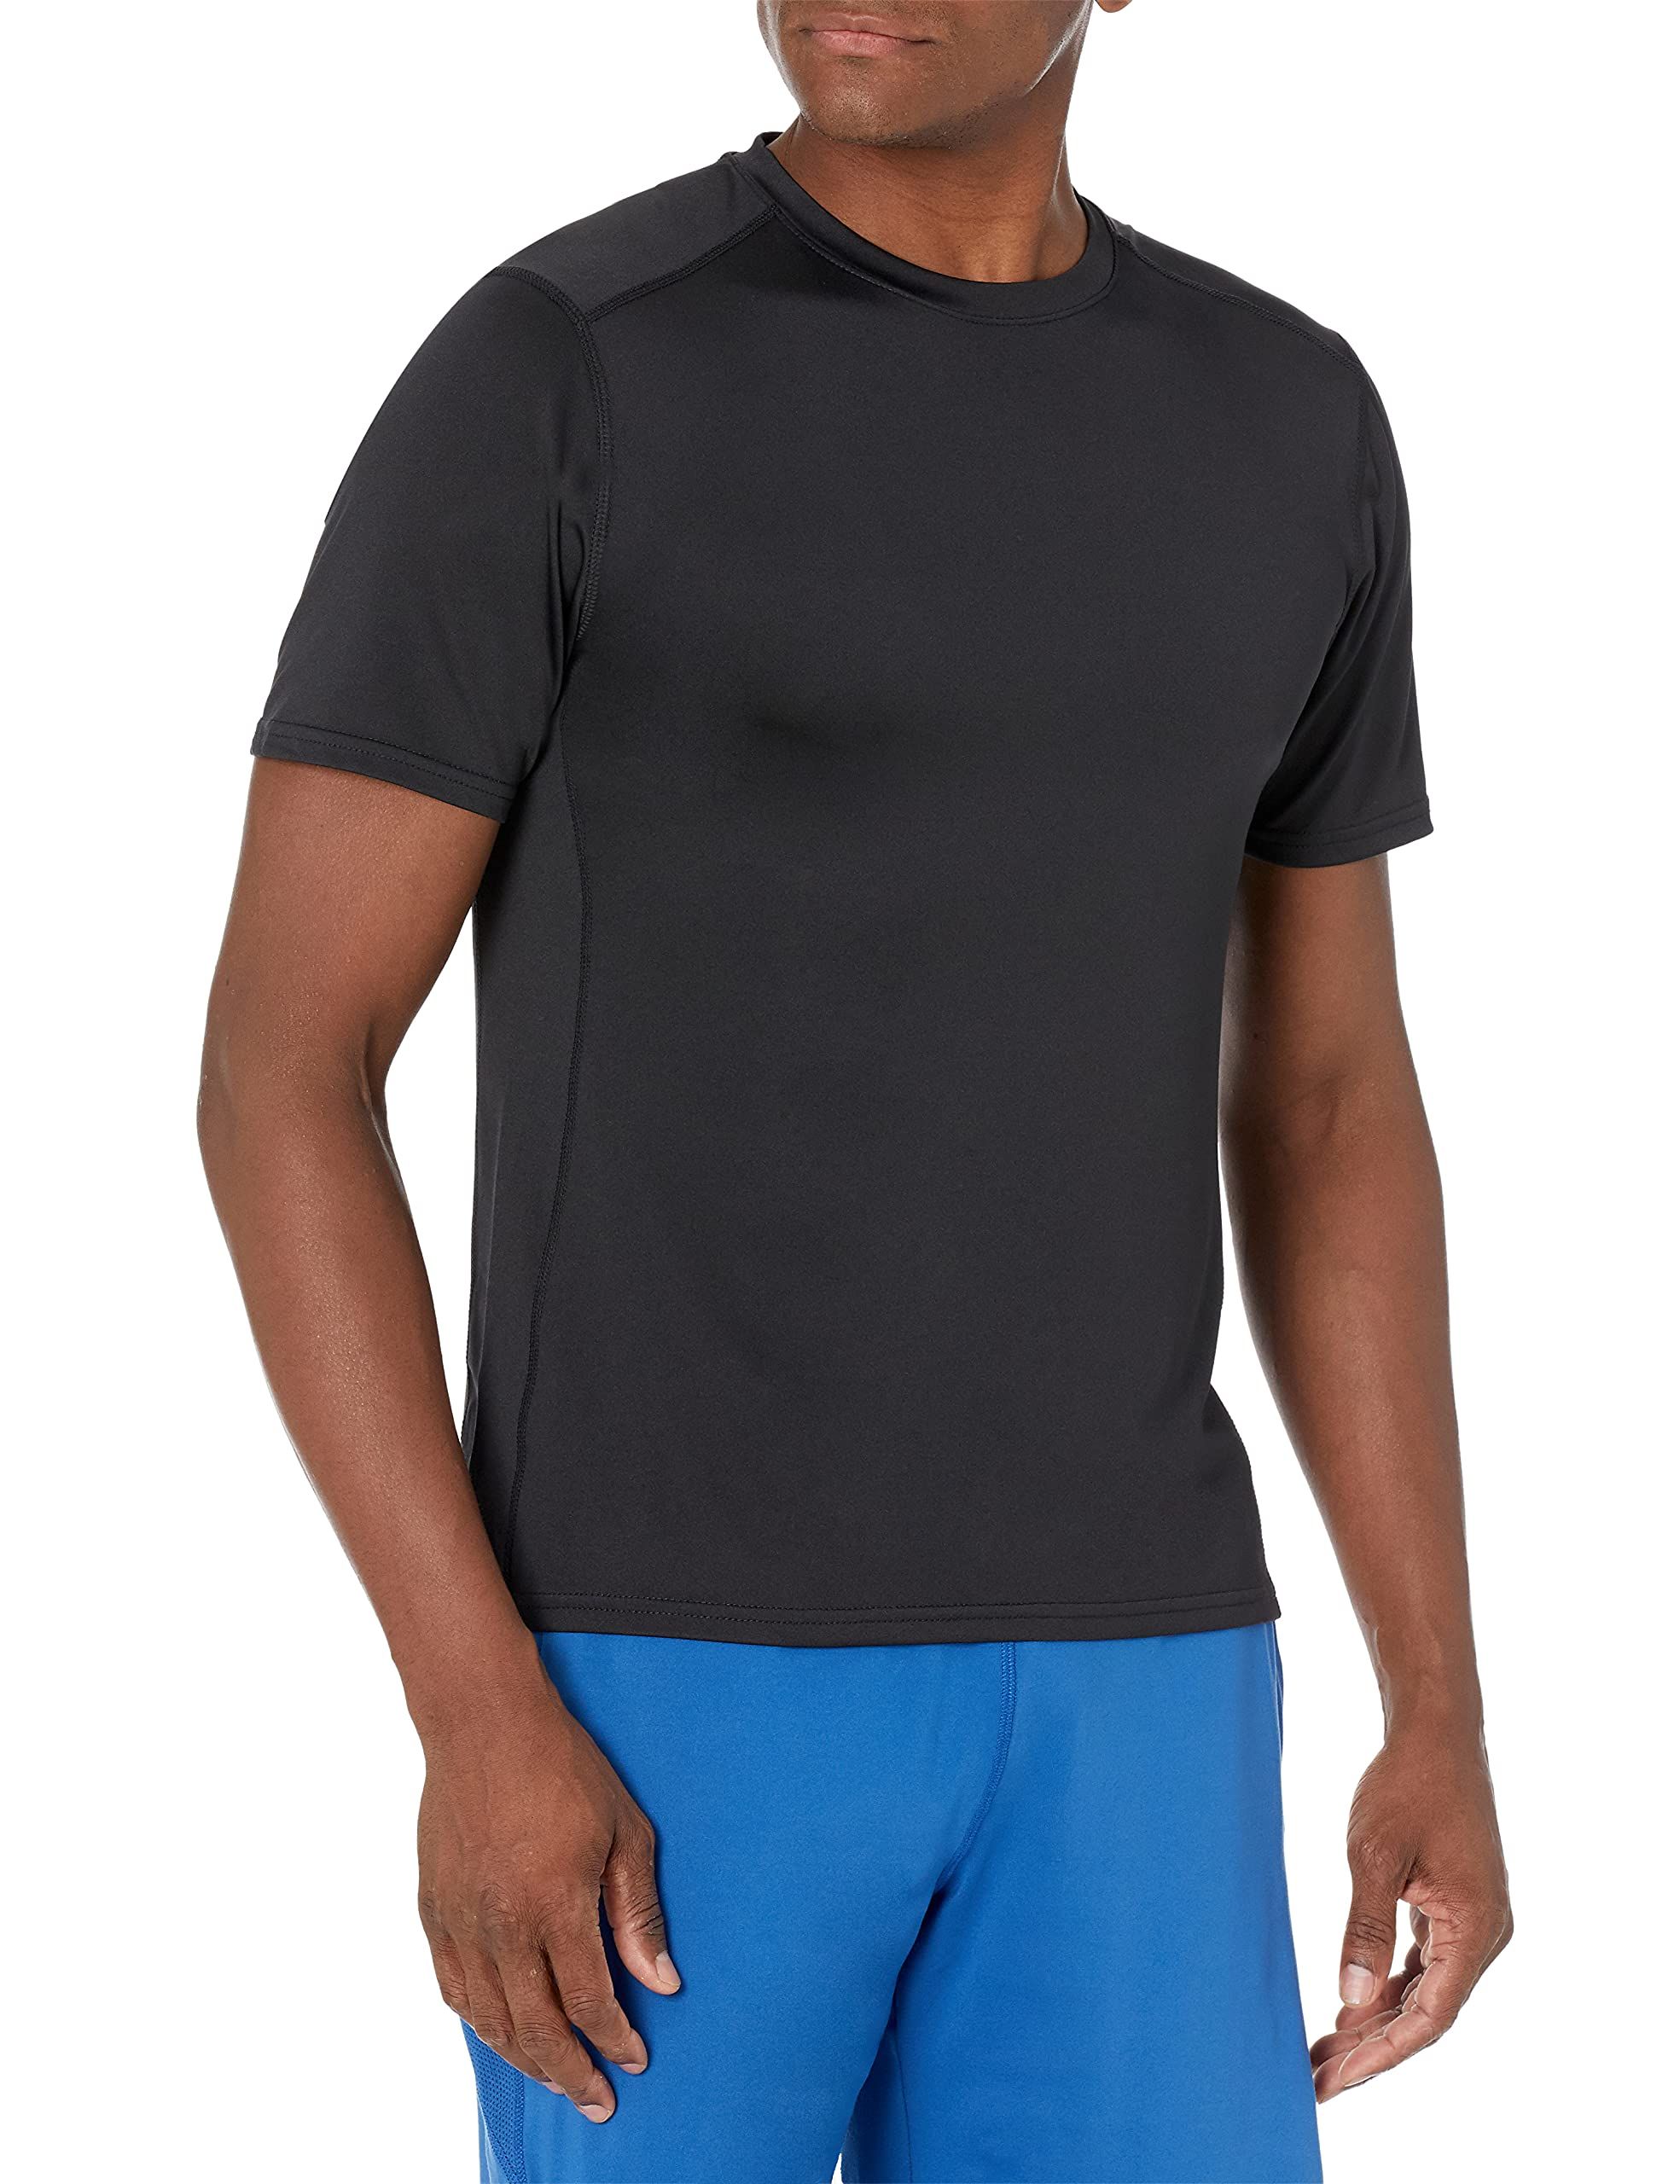 21 Cool Workout Shirts for Men to Buy Now